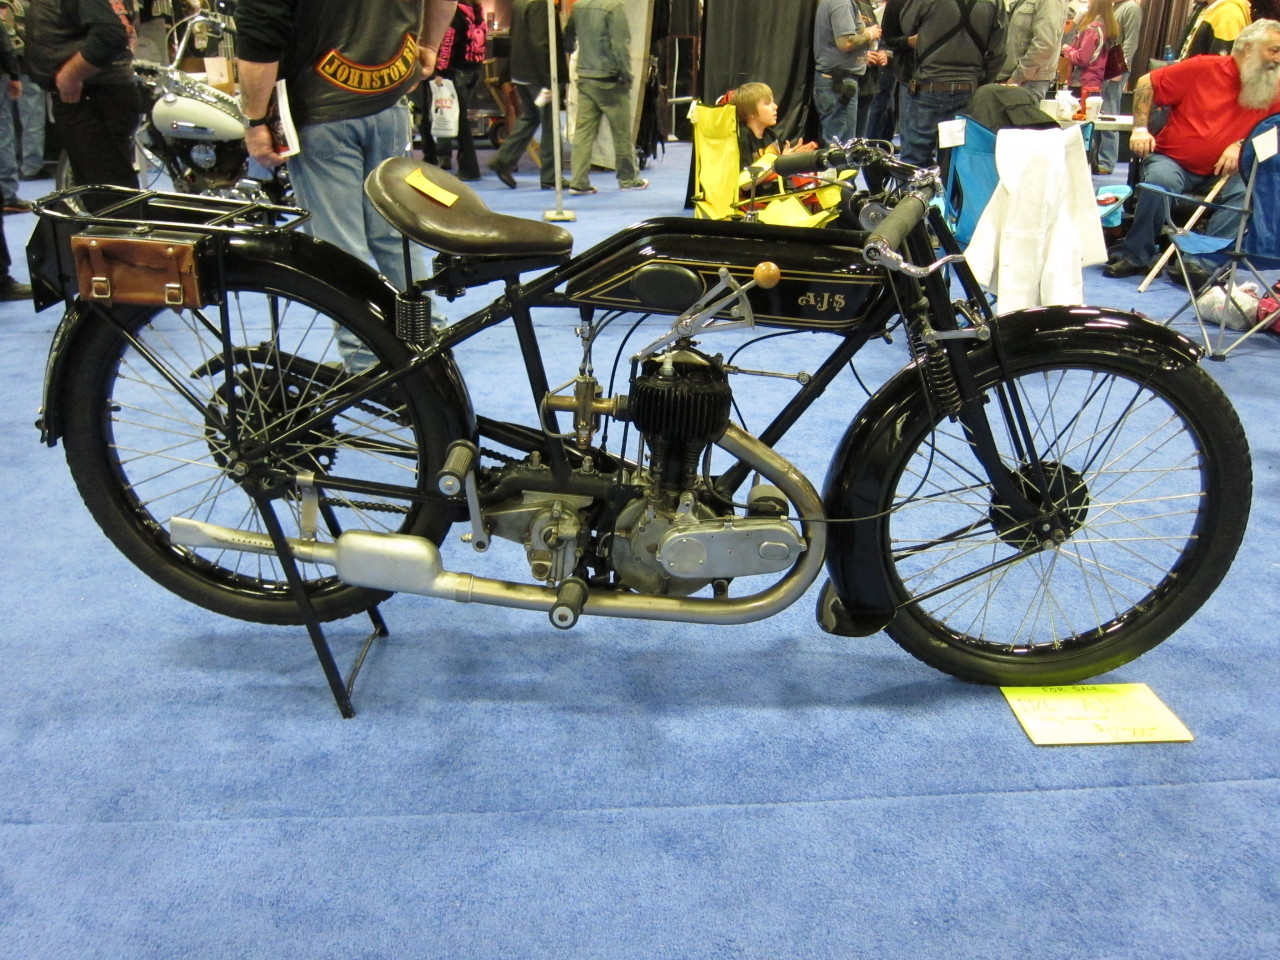 scoothub:  scooter pic of the day: a fully restored 1926 ajs motorcycle, on display